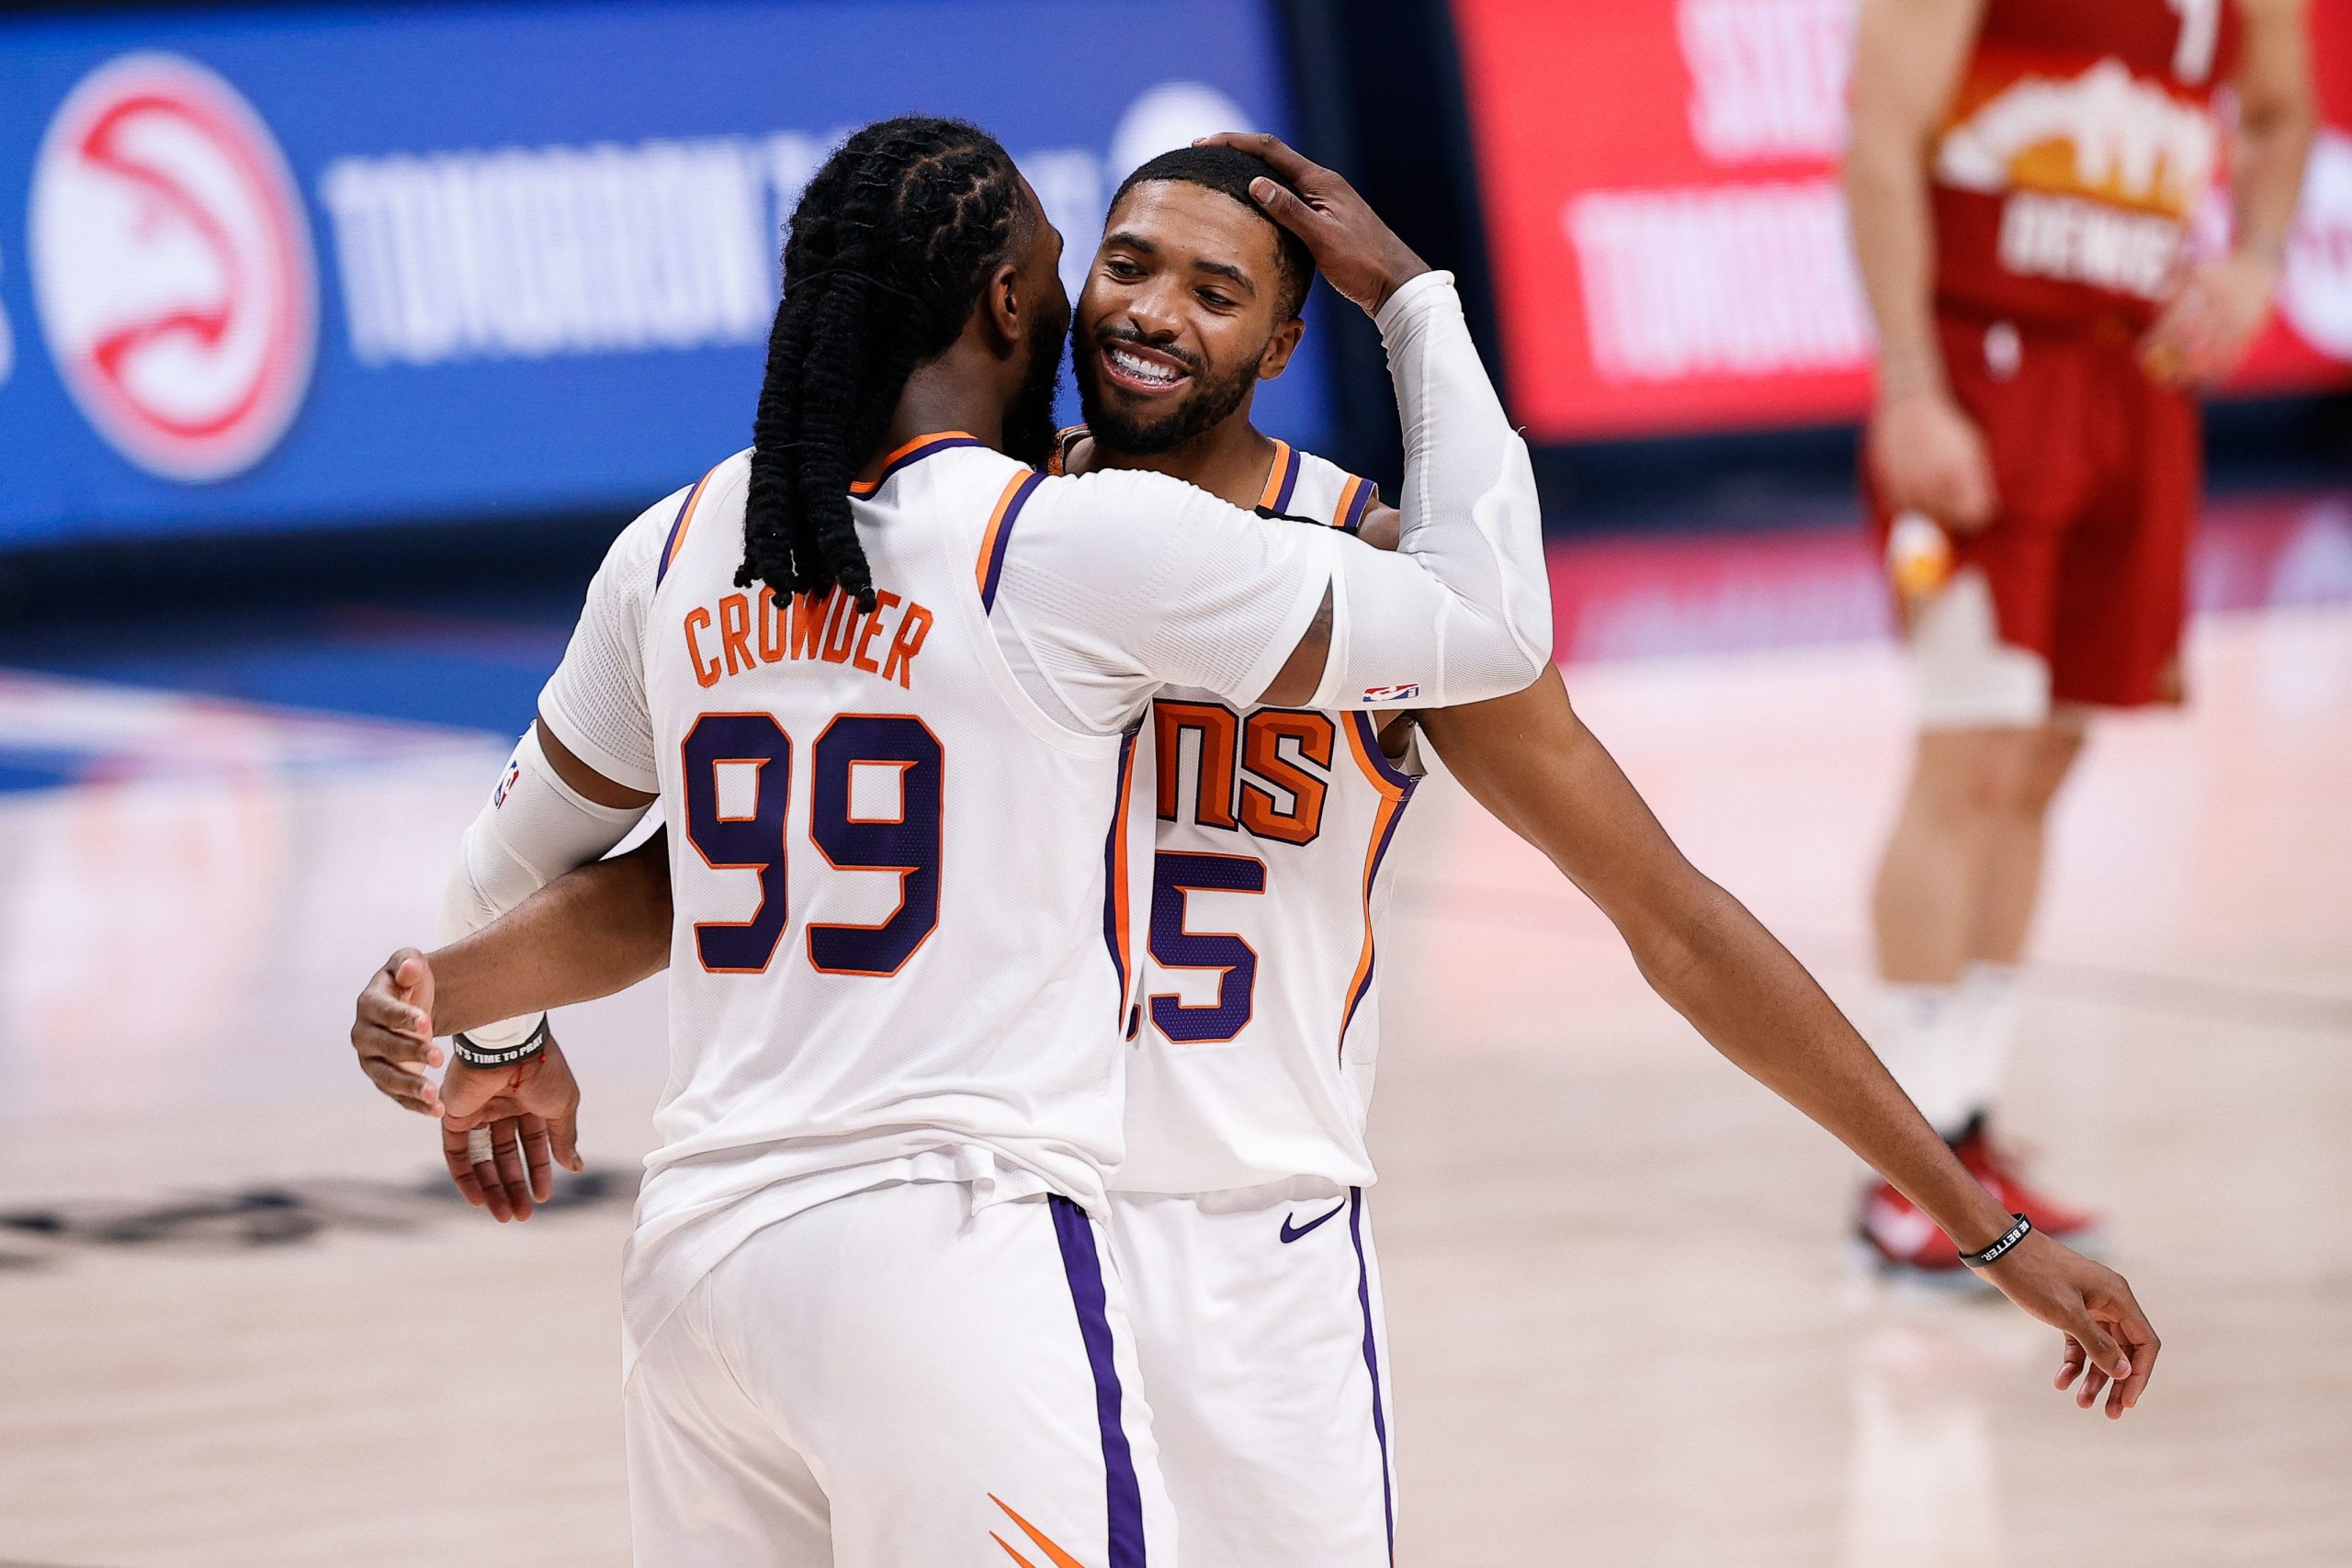 Phoenix Suns Qualify for NBA Western Conference Finals